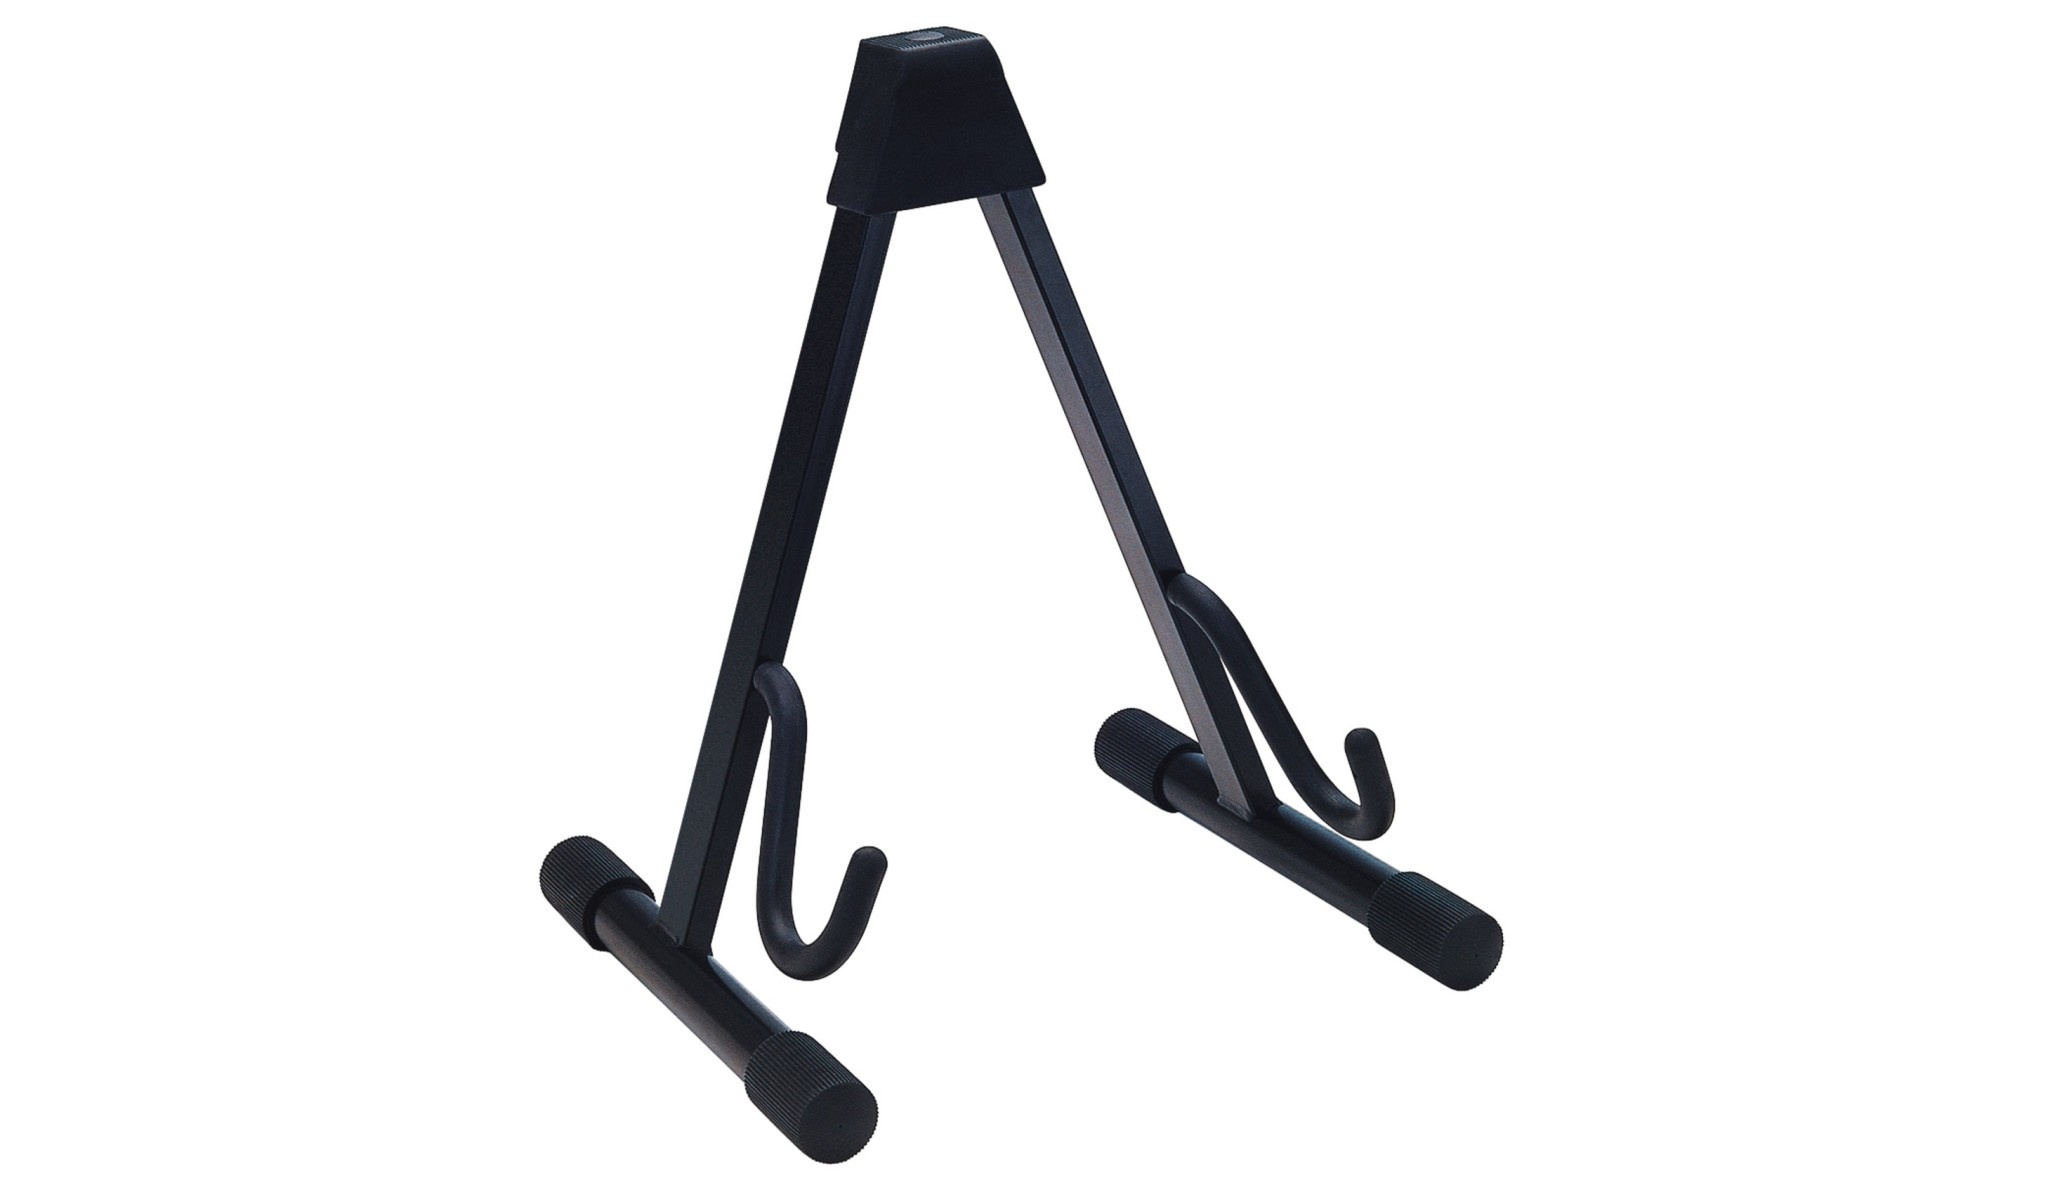 K&M K&M Electric Guitar Stand